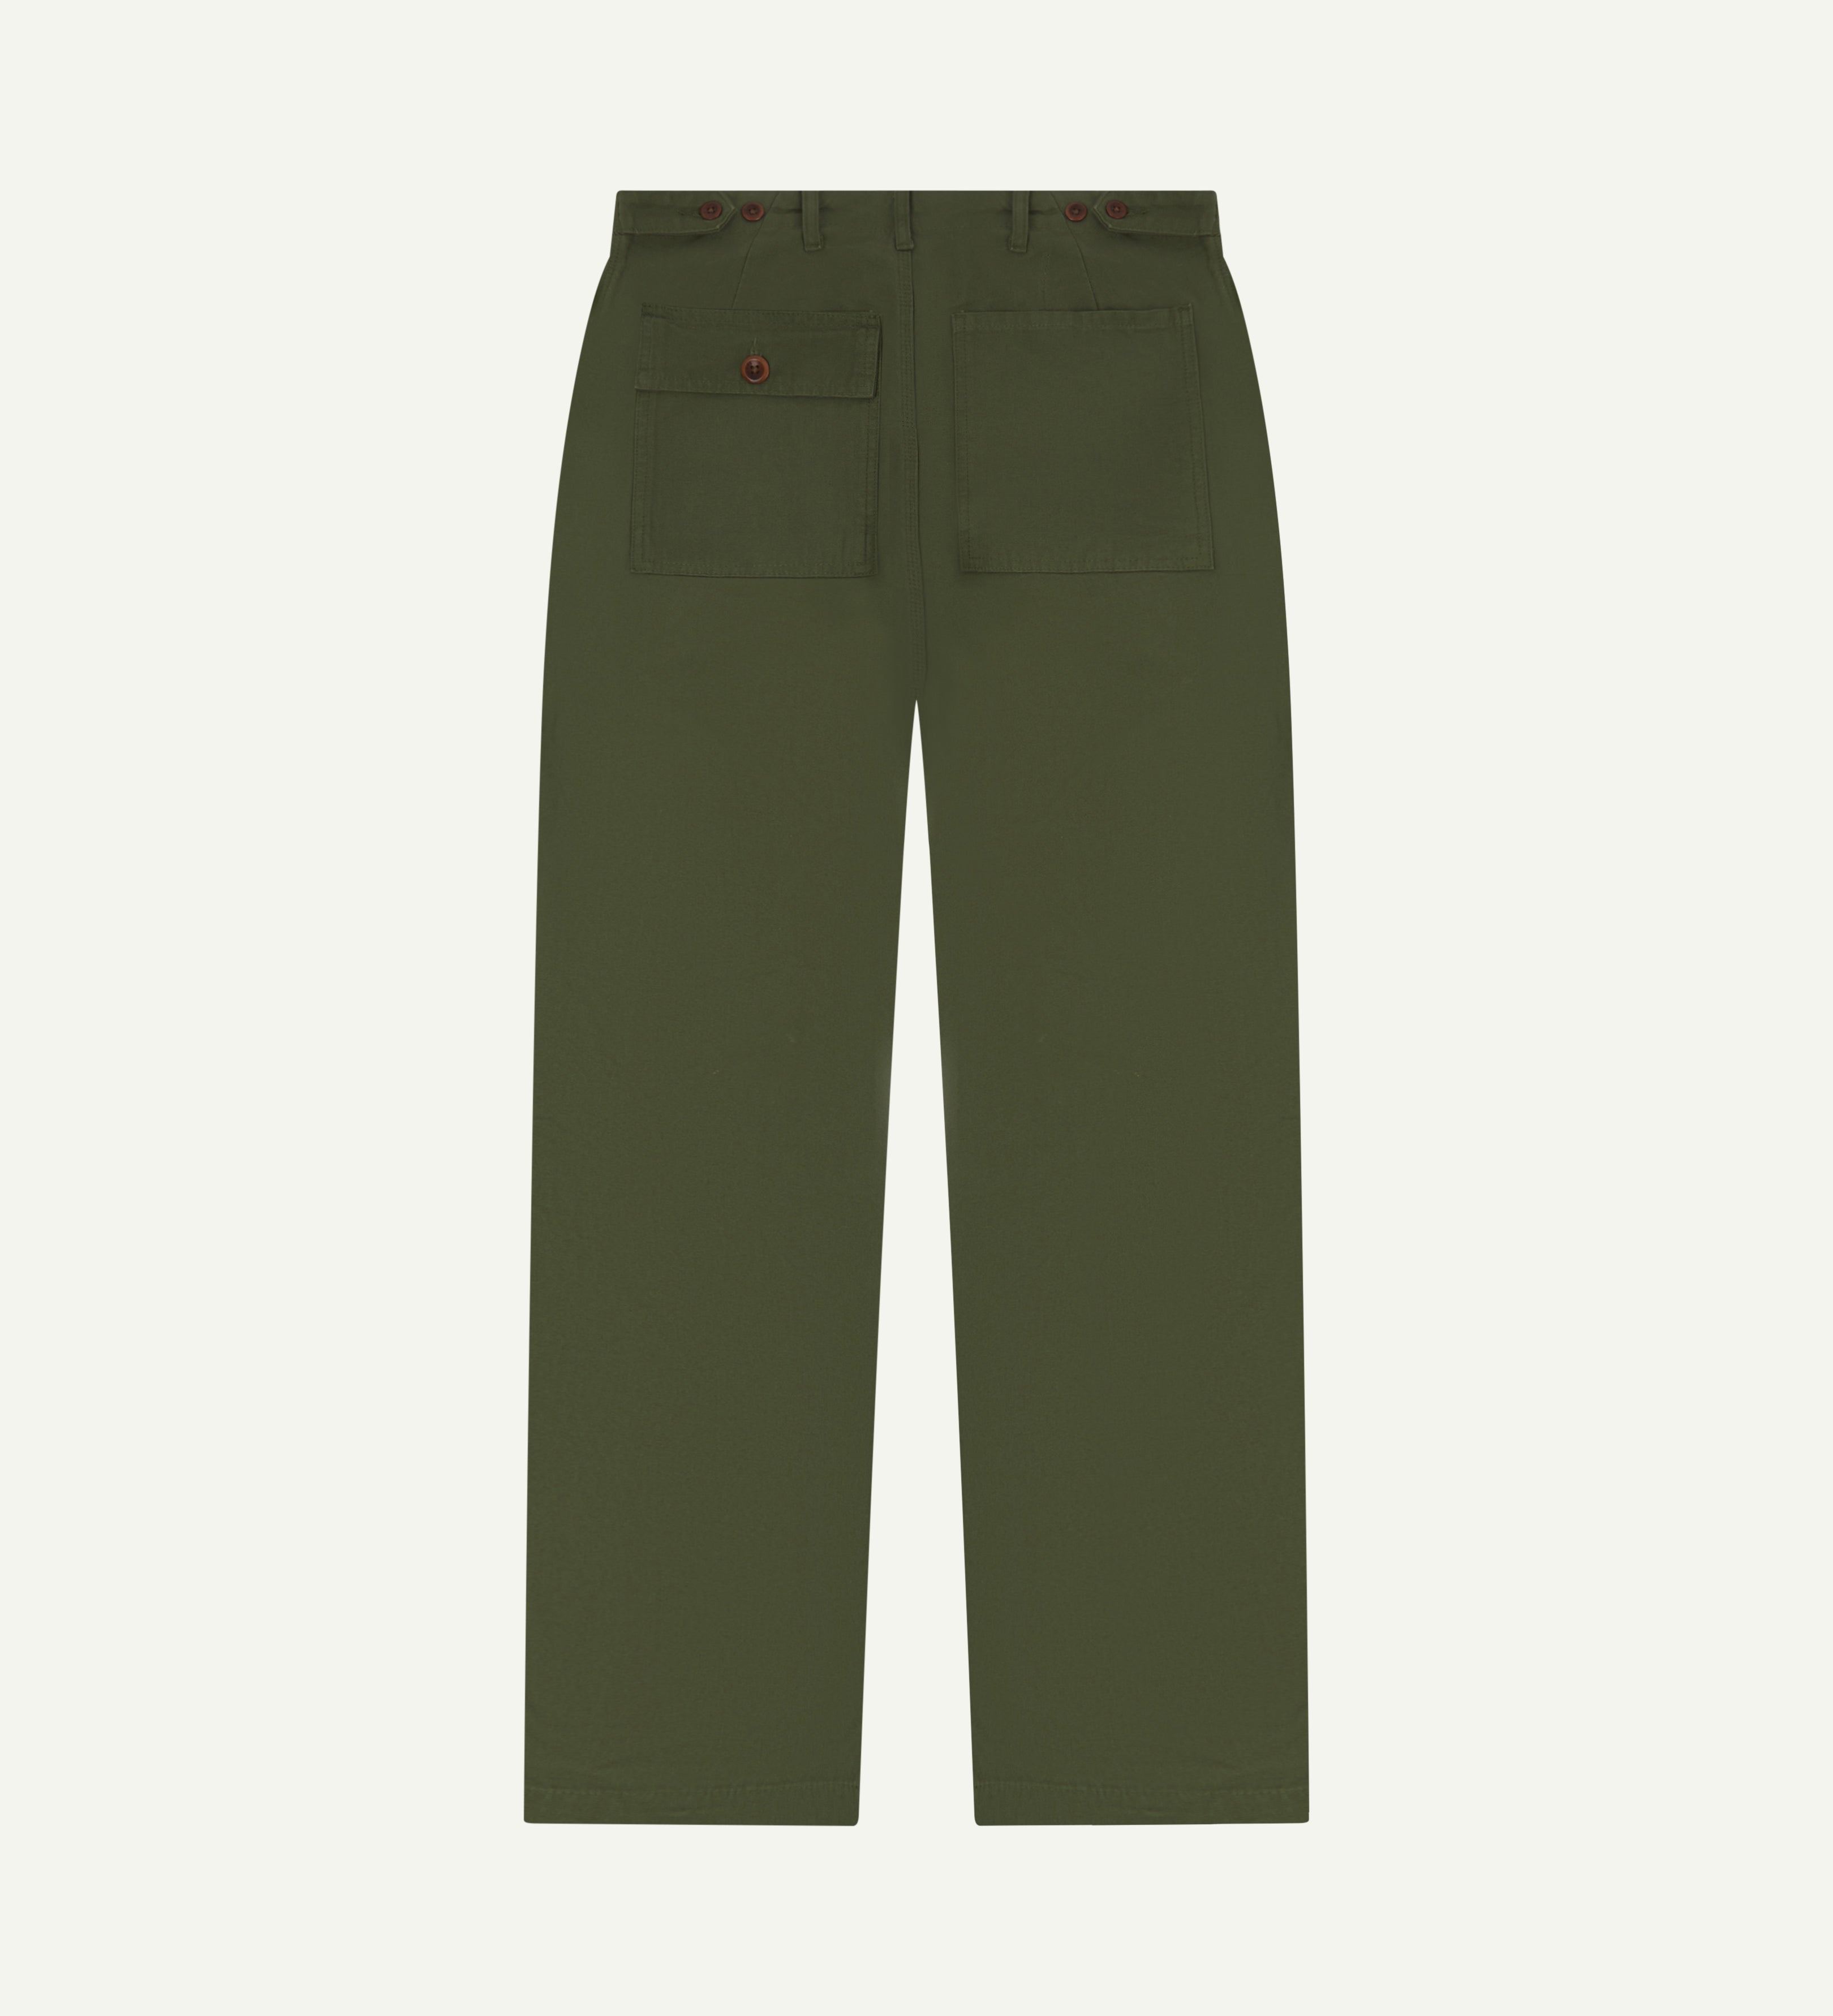 Back view of #5005 Uskees organic cotton mid-green men's trousers on white background.